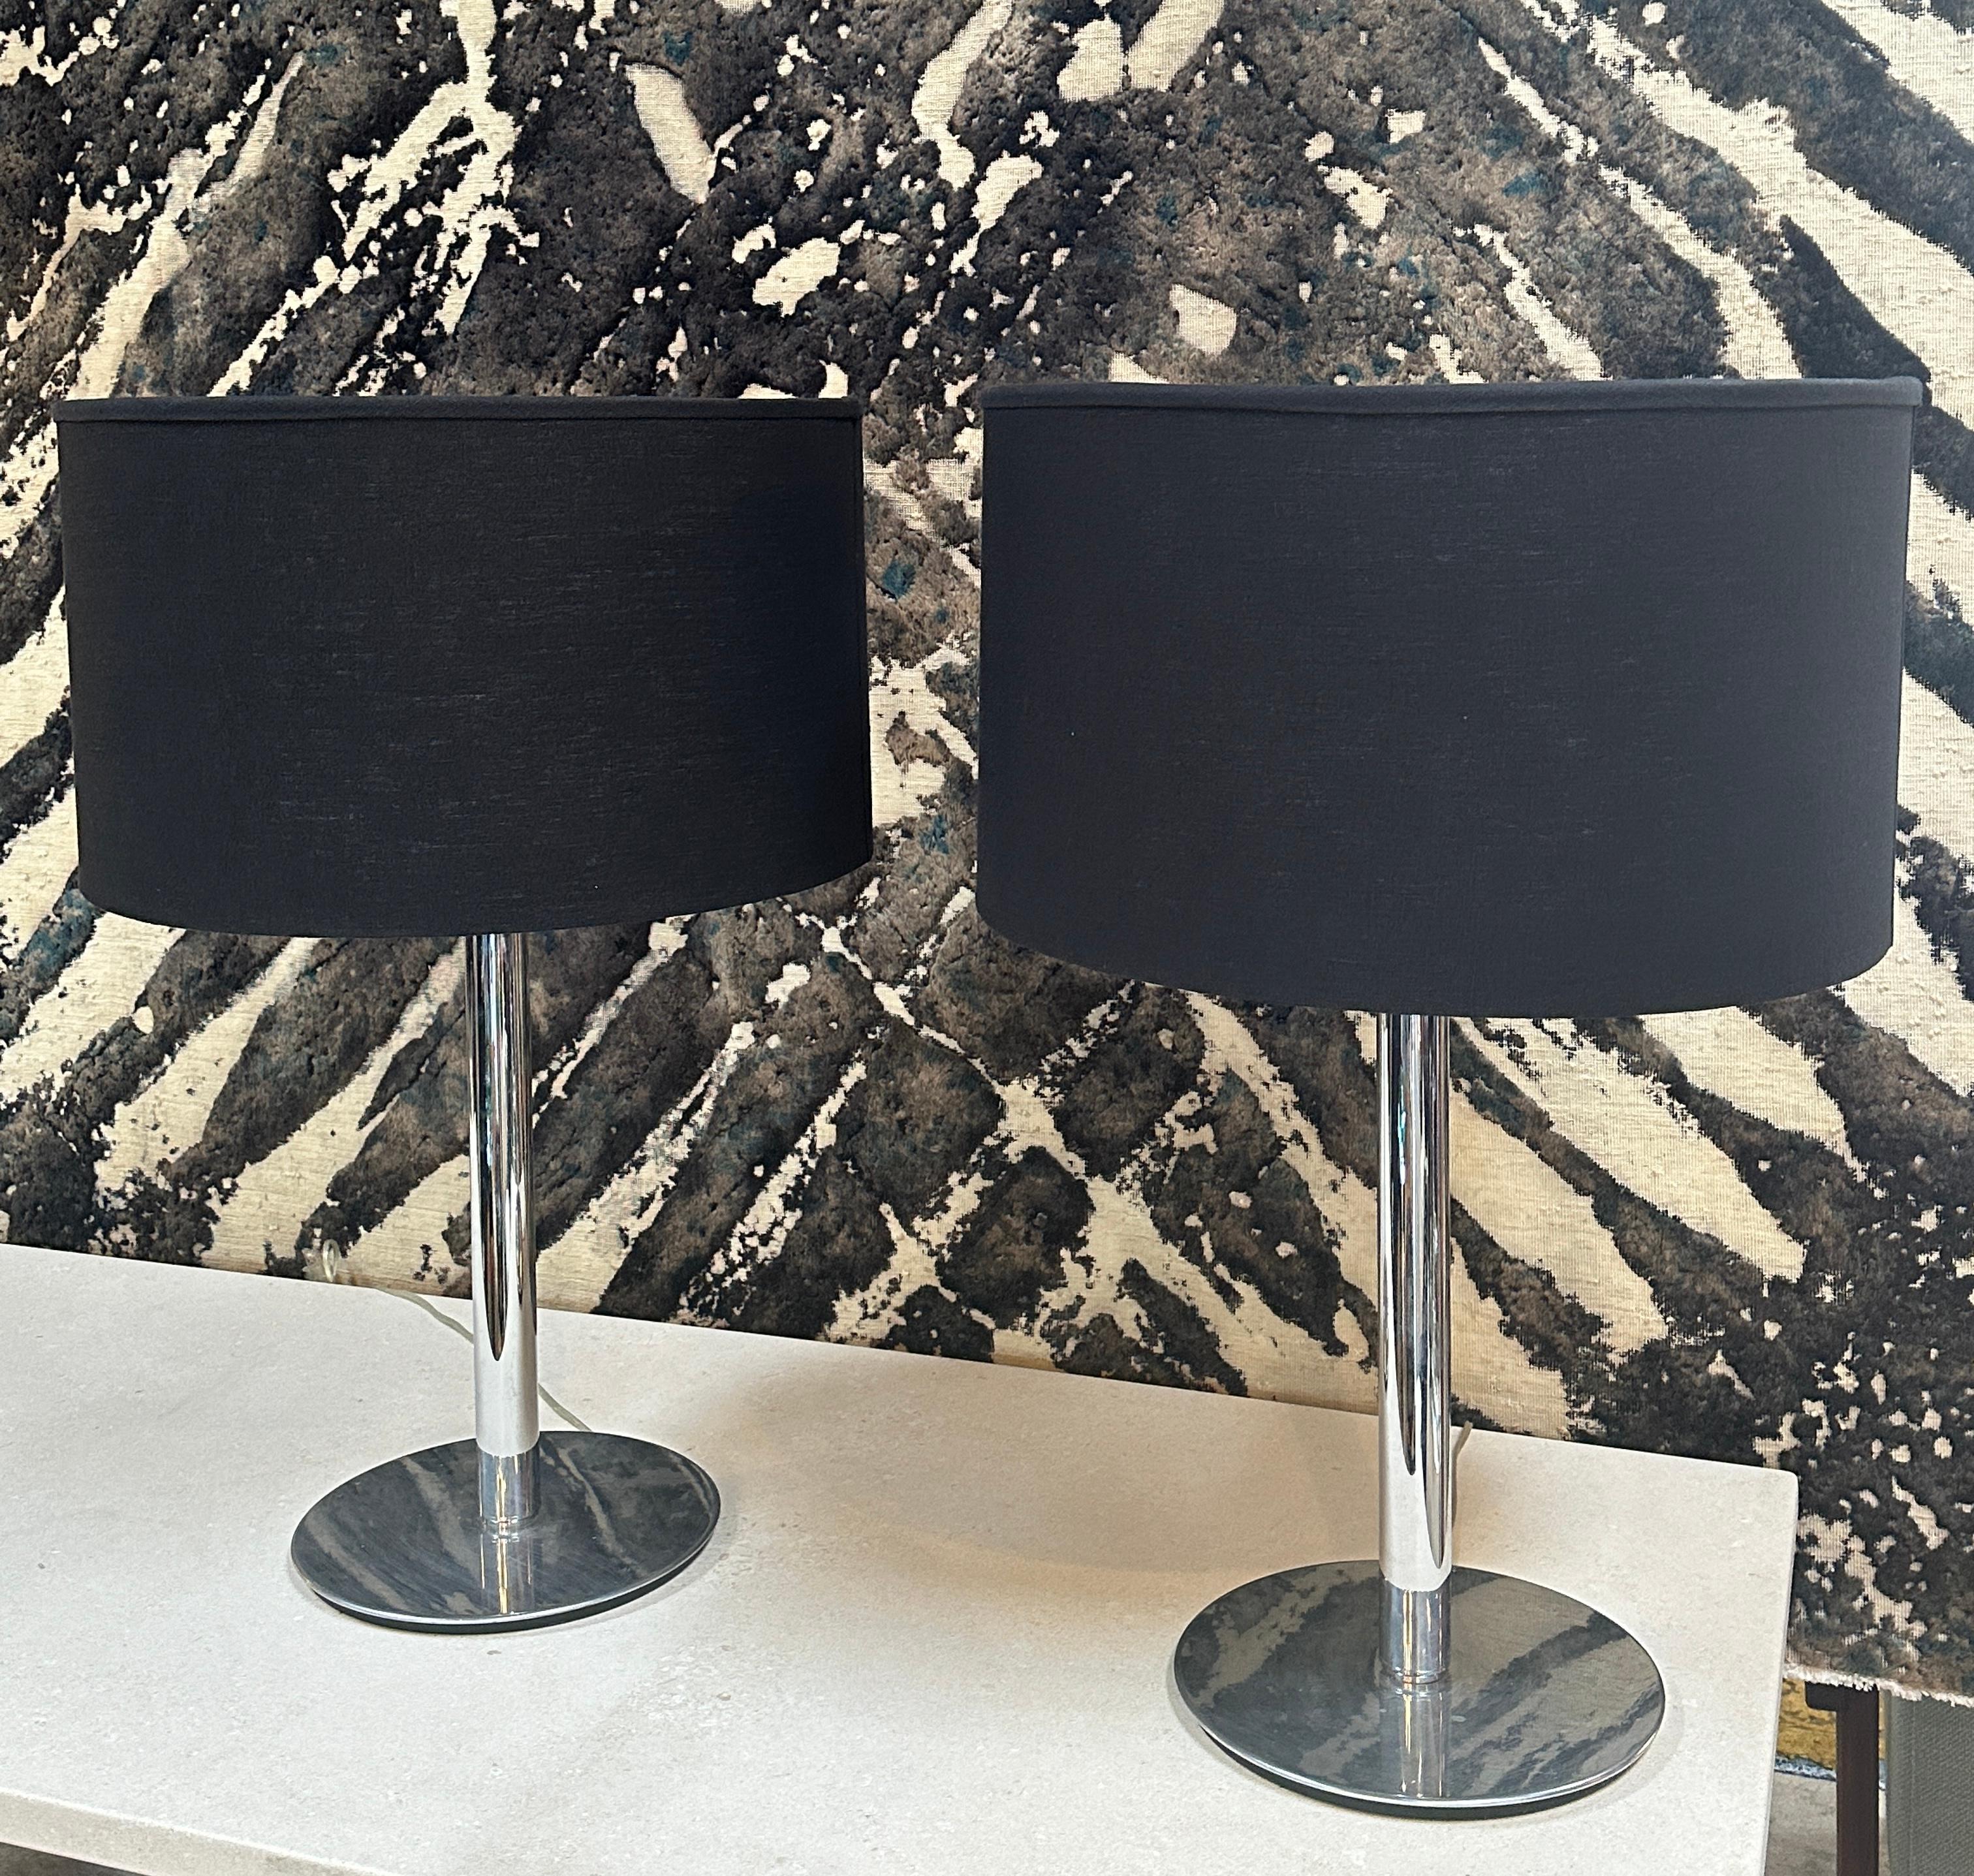 Extraordinary Oversize pair of 2 Mid century Italian lamps made whit chrome base and a beautiful and new black shade.
Those lamps are gorgeous and will fit in every mid century space.